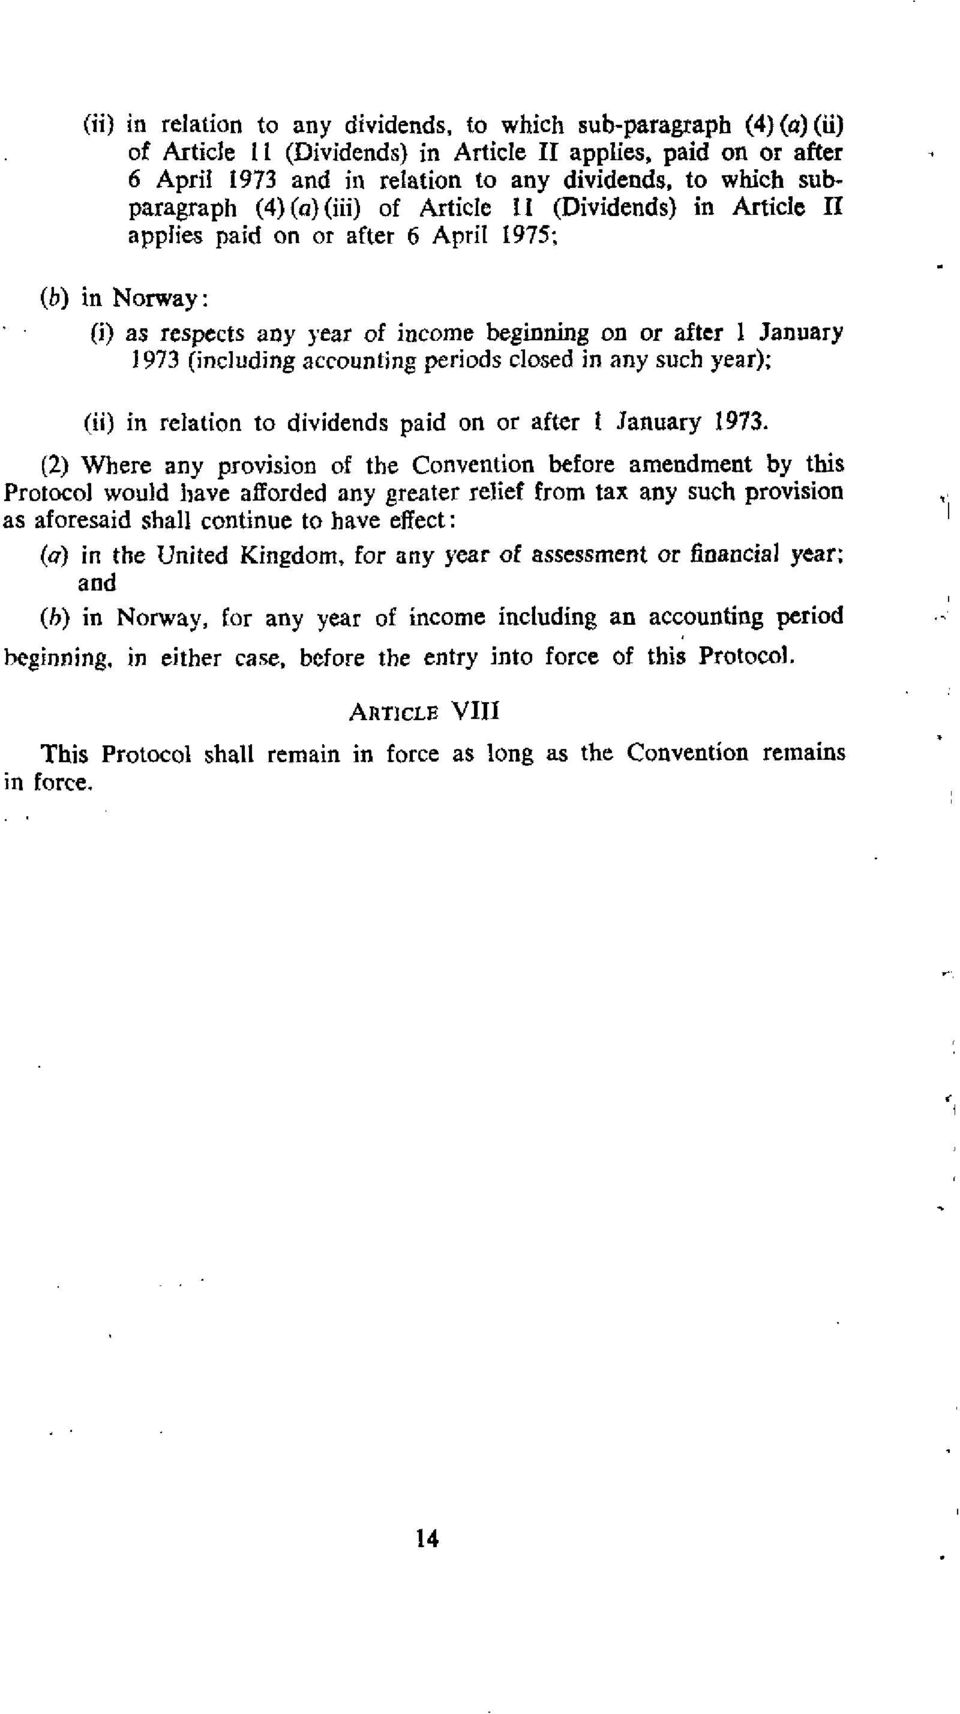 (including accounting periods closed in any such year); (ii) in relation to dividends paid on or after 1 January 1973.